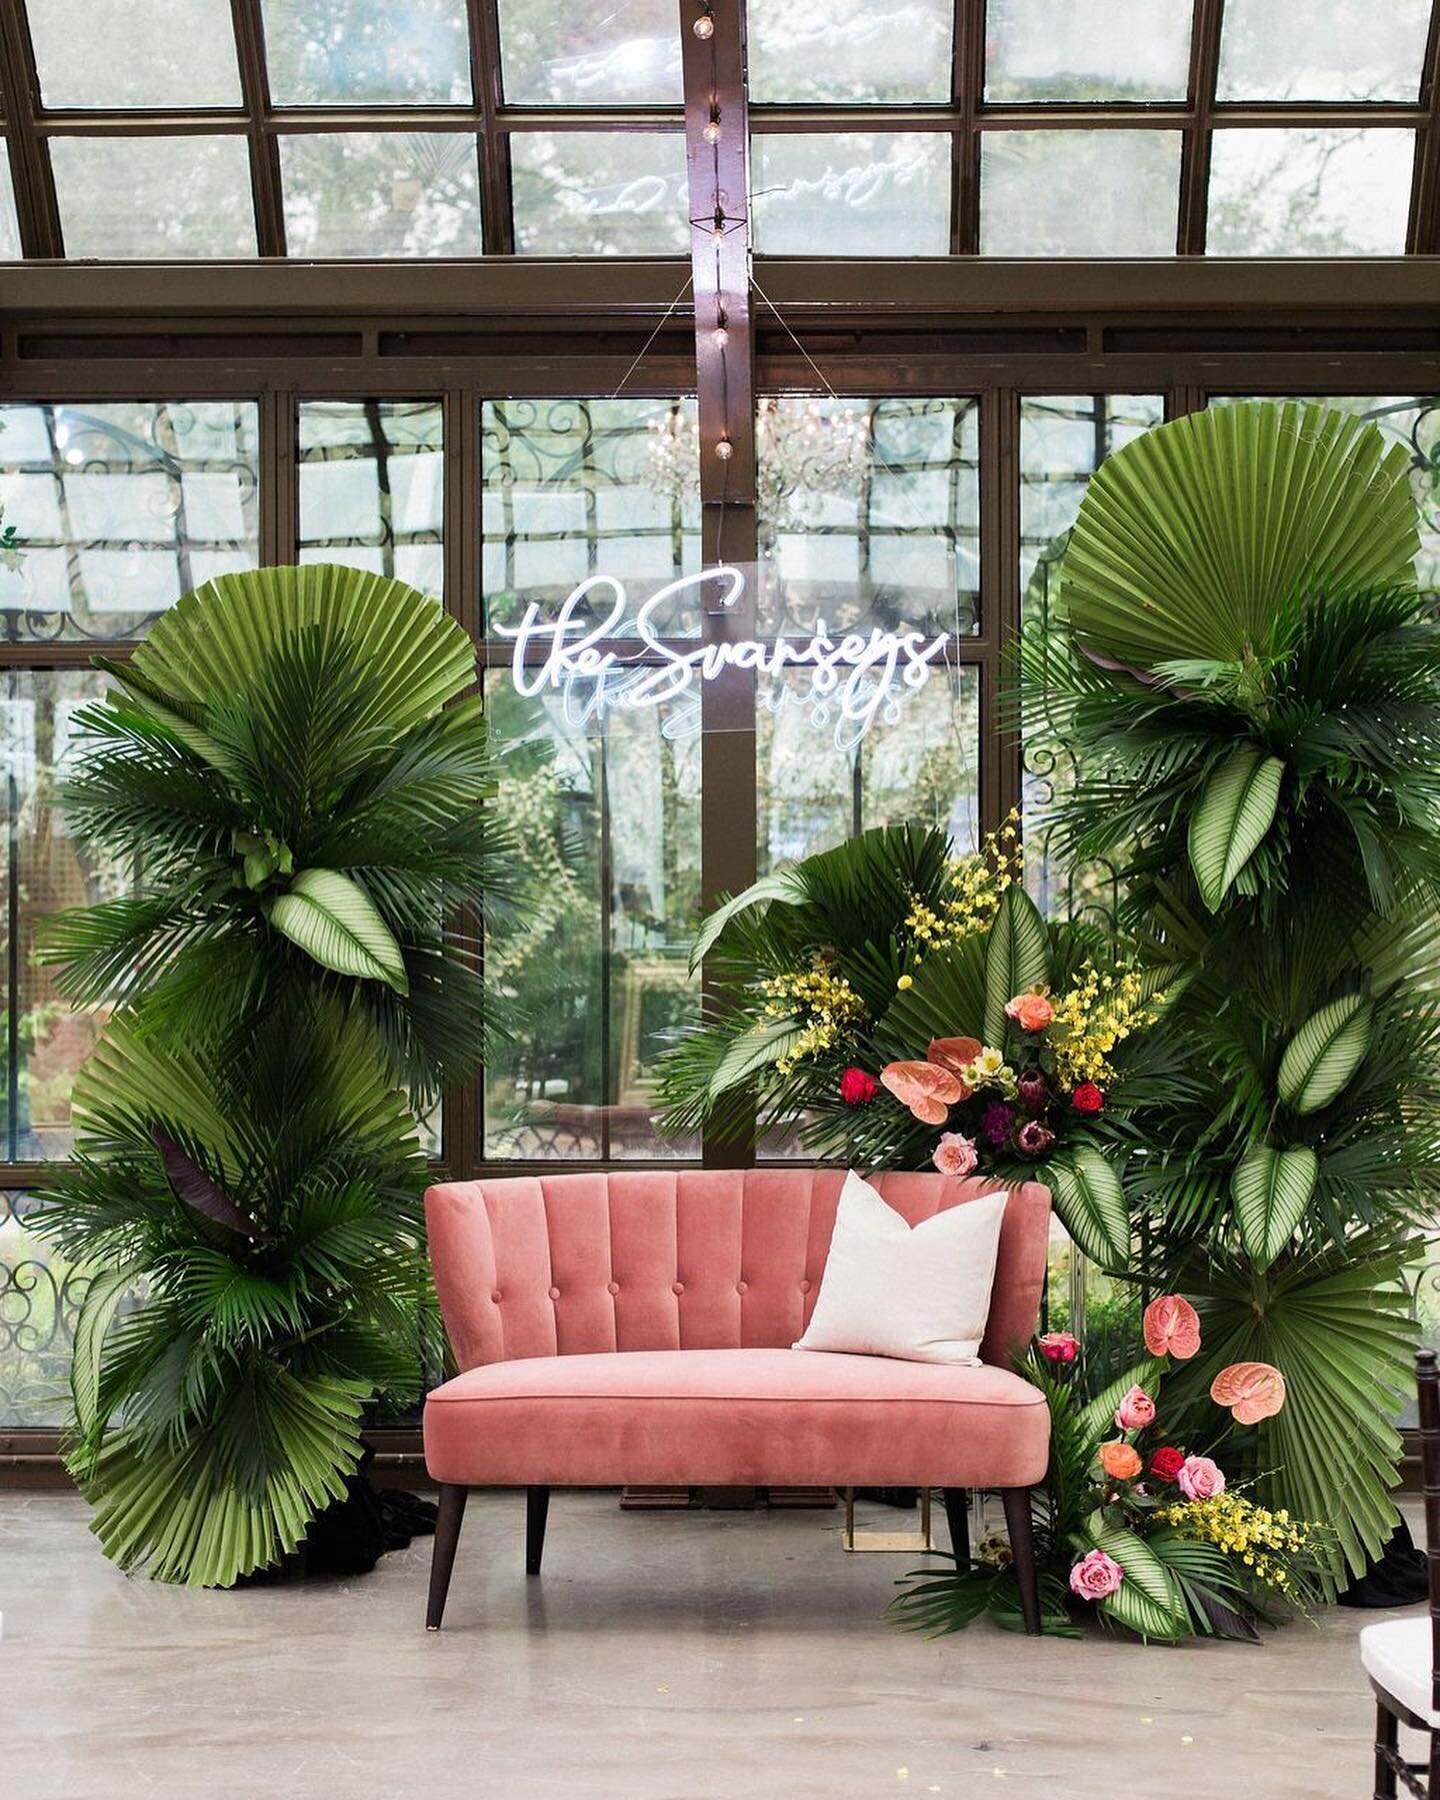 Doesn&rsquo;t this wedding make you want a tropical vacay ☀️🌴

Beautifully orchestrated by our vendor liaison, @watertowineevents 

Tell us your favorite detail! 💗